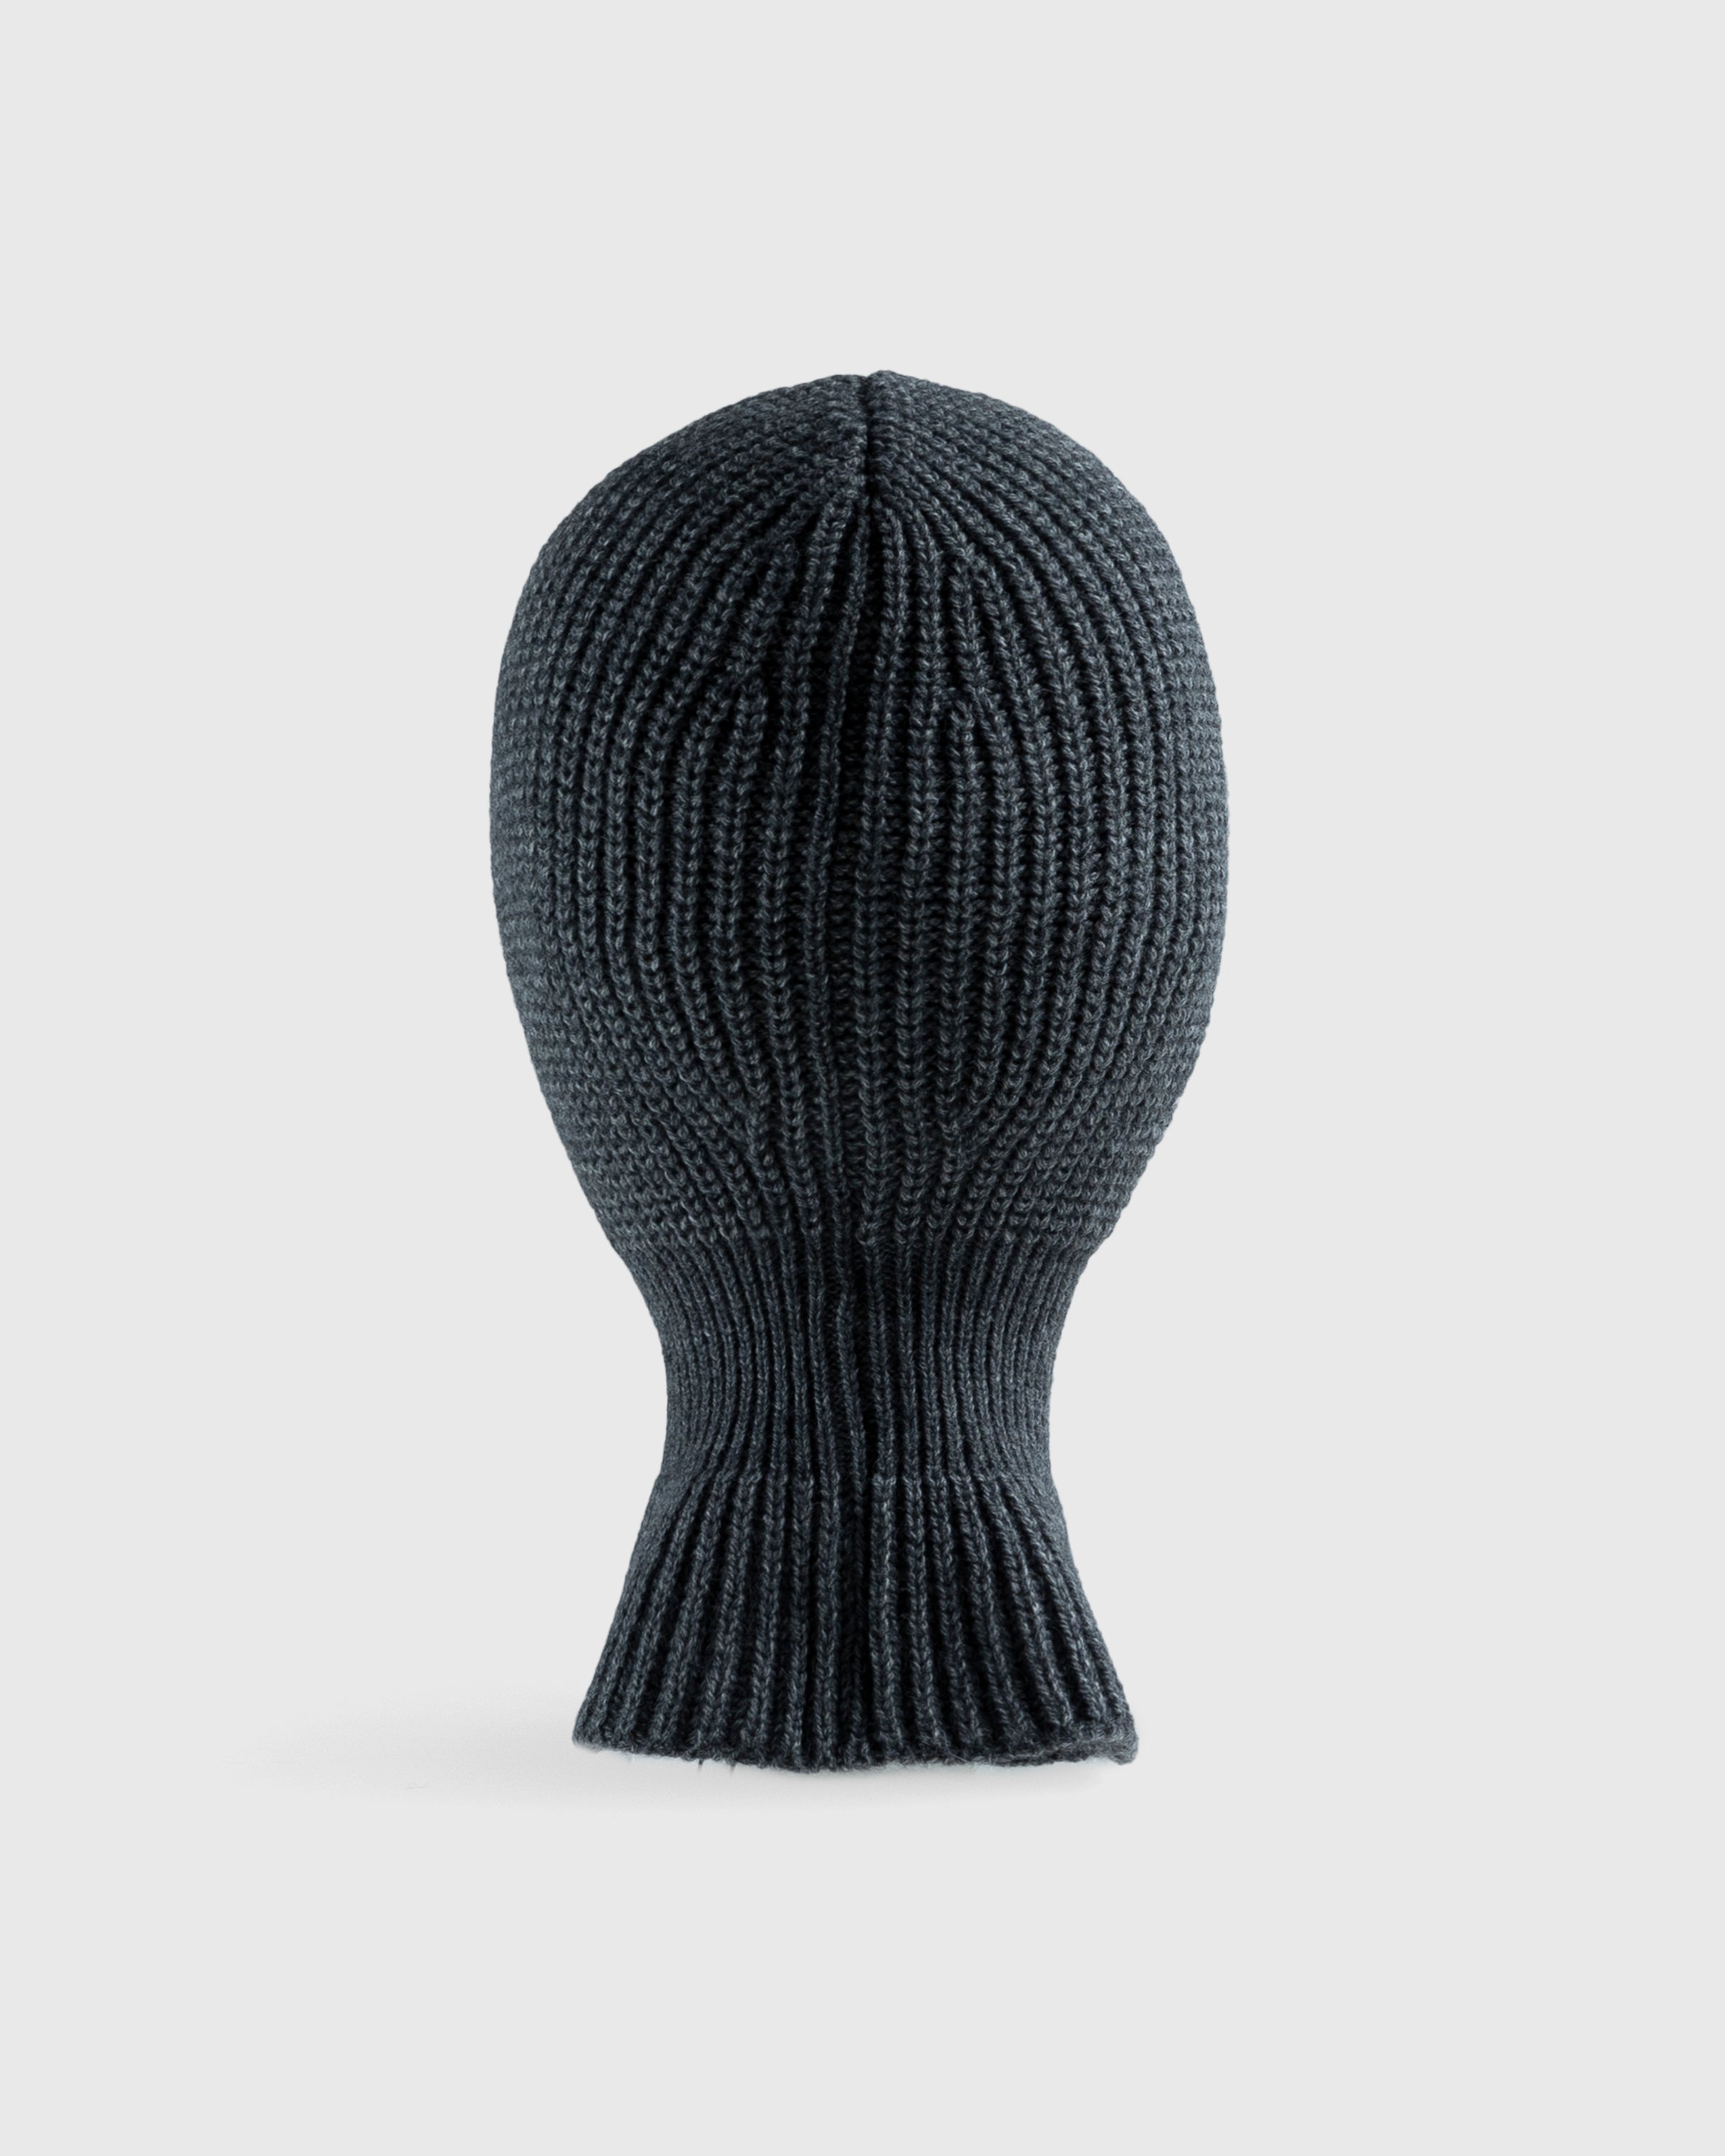 Lemaire - Knit Balaclava Grey - Accessories - Grey - Image 4